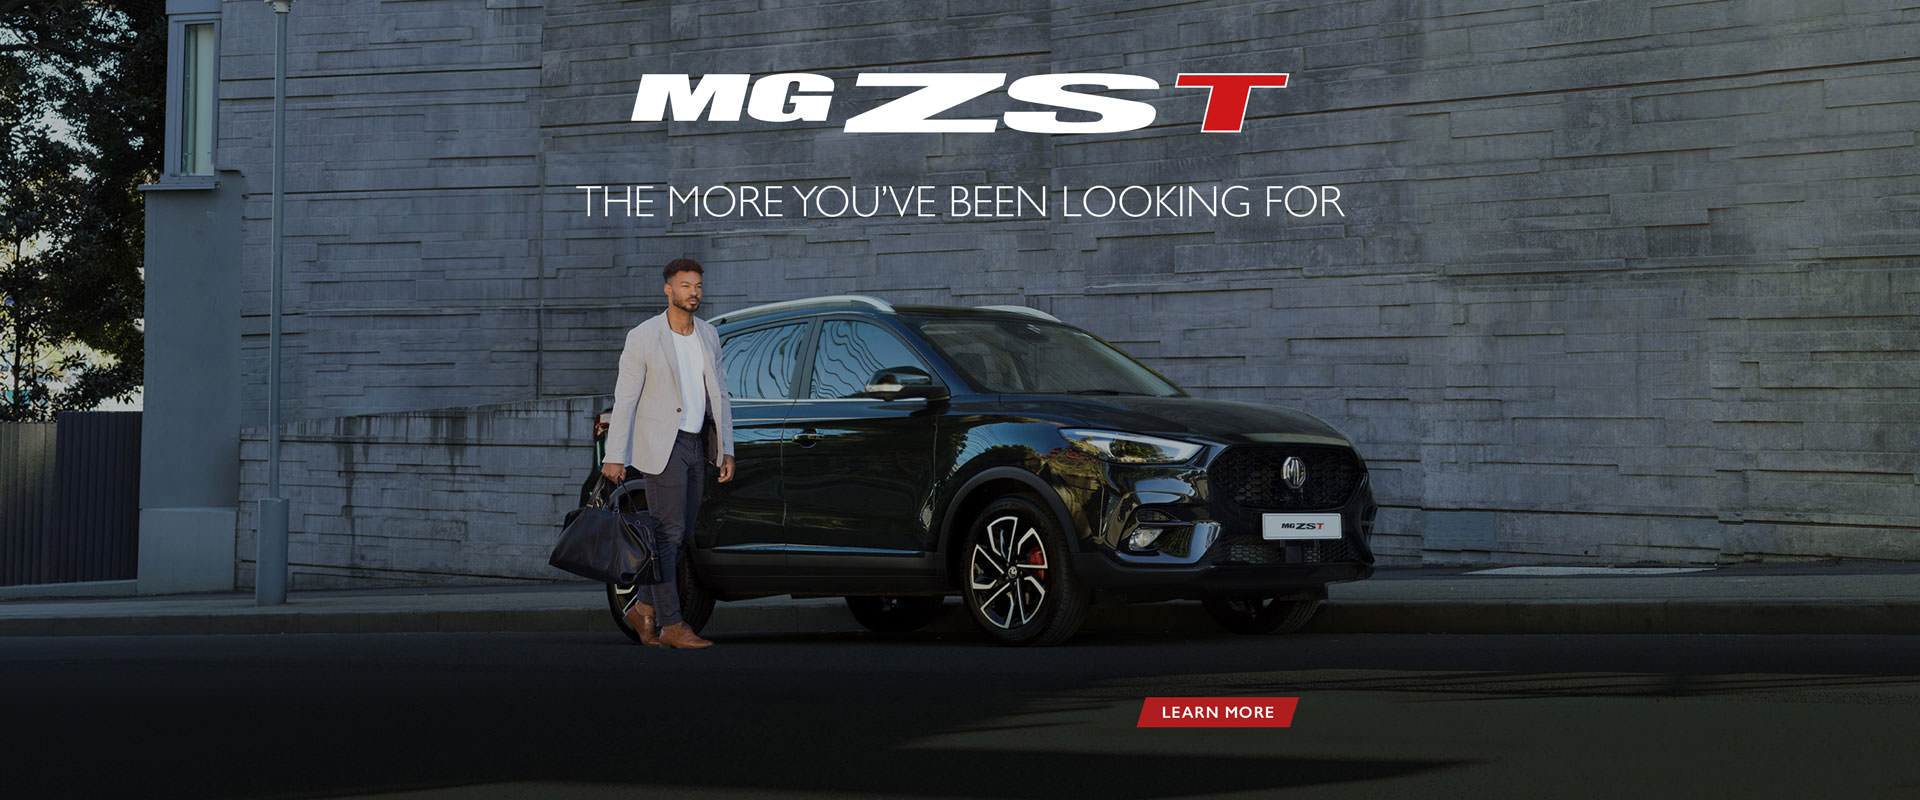 MG ZST. The more you've been looking for. Learn more. 